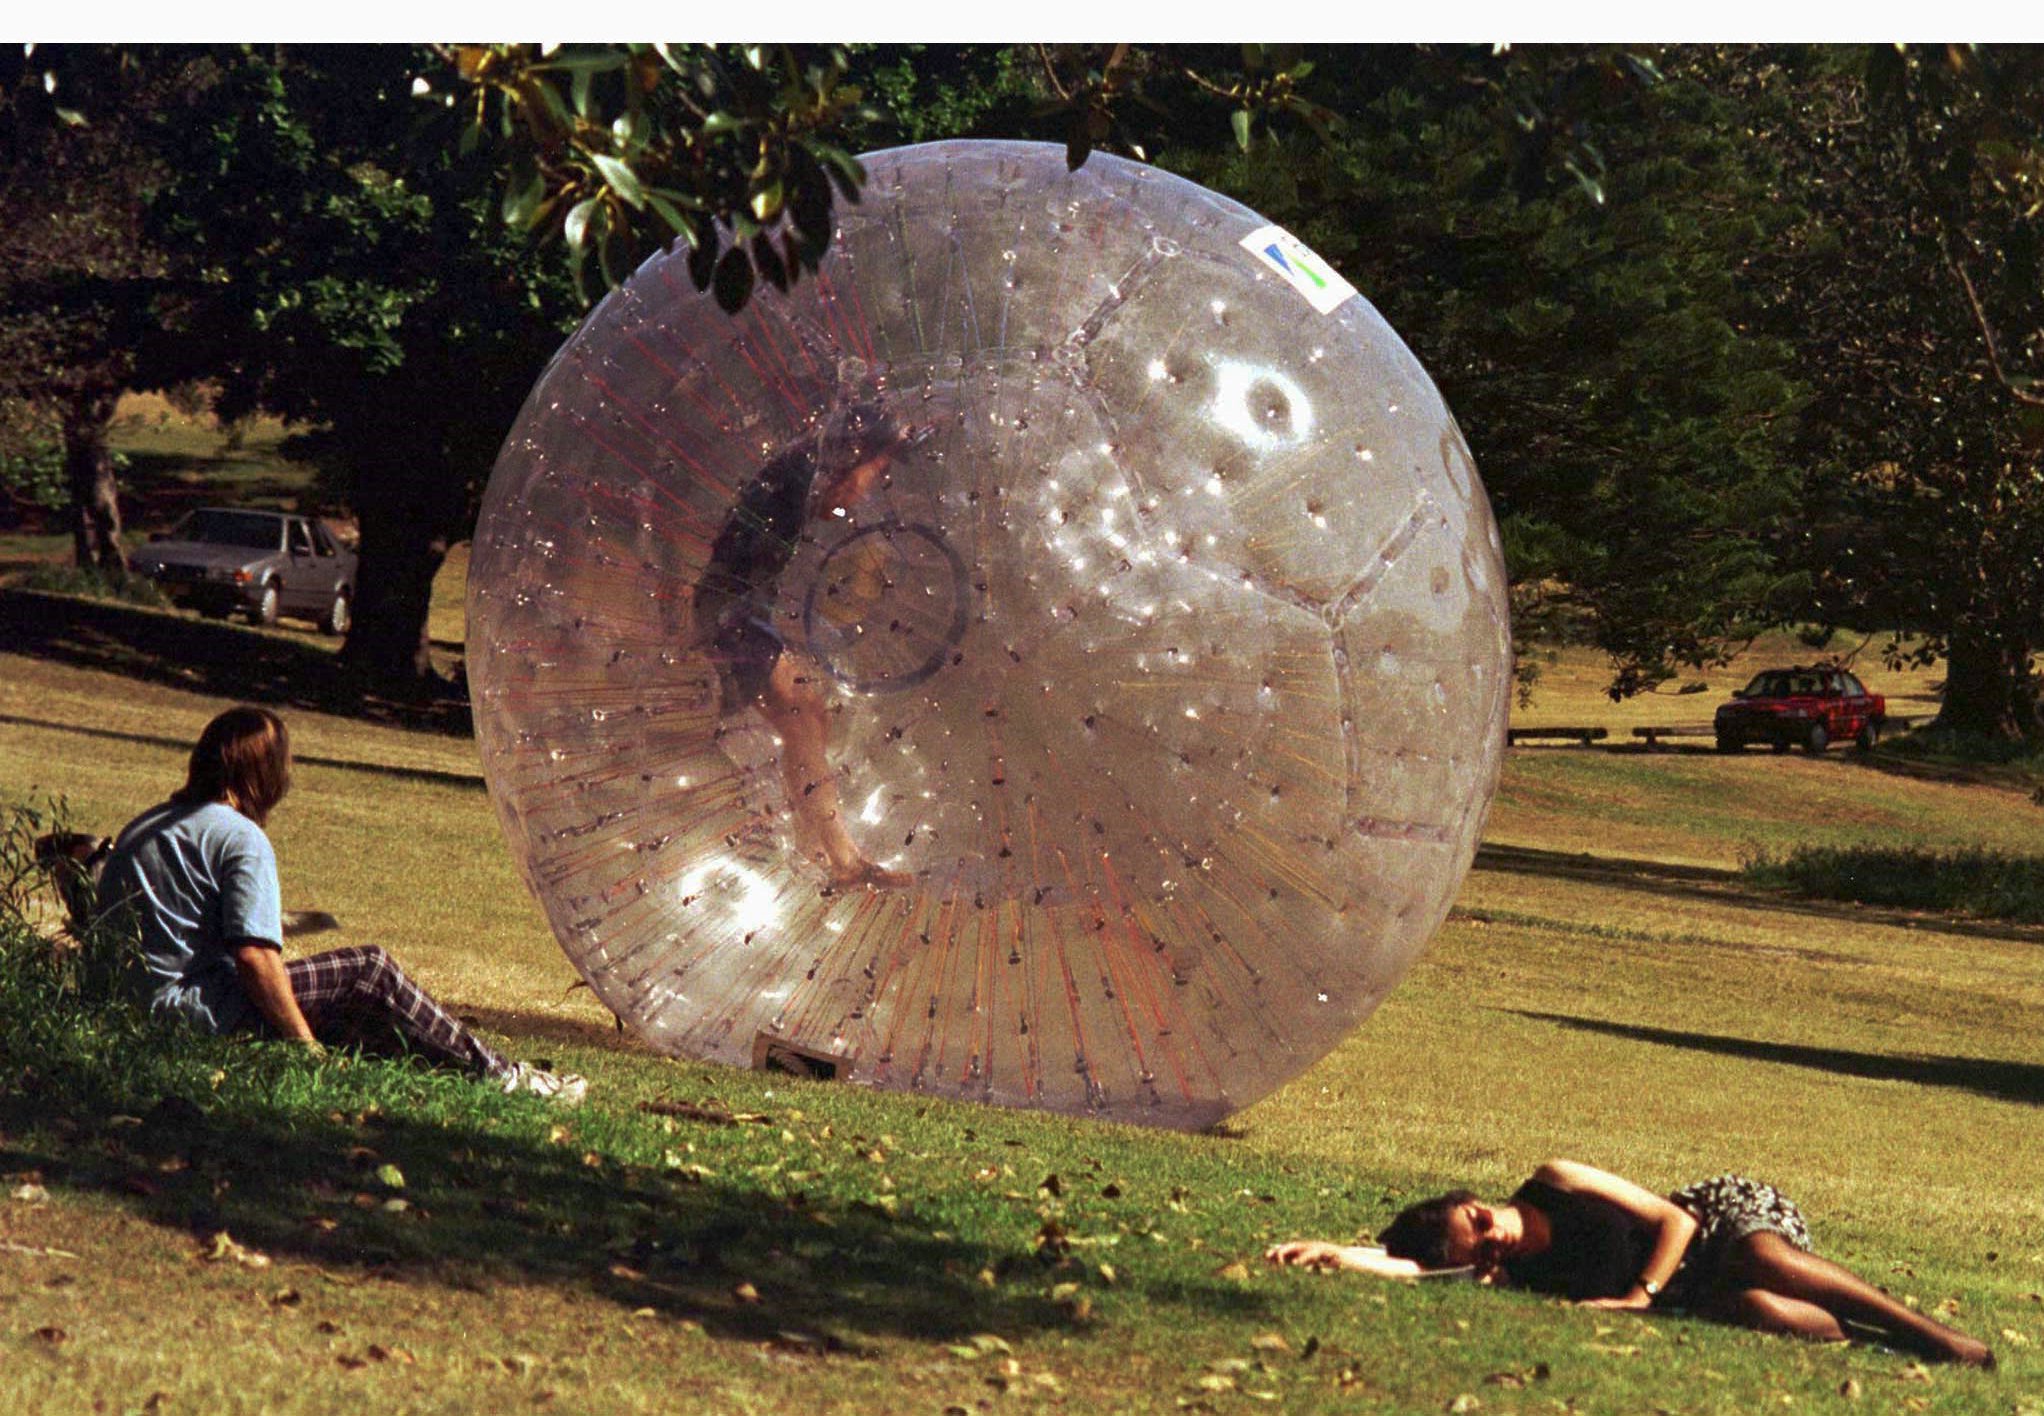 Inventor David Akers rolls inside a ‘Zorb’, down a Sydney hill. Zorbs can reach speeds of up to 50 kilometres per hour, but a tragedy in Russia this week has highlighted the risks involved in the sport. Photo: Reuters